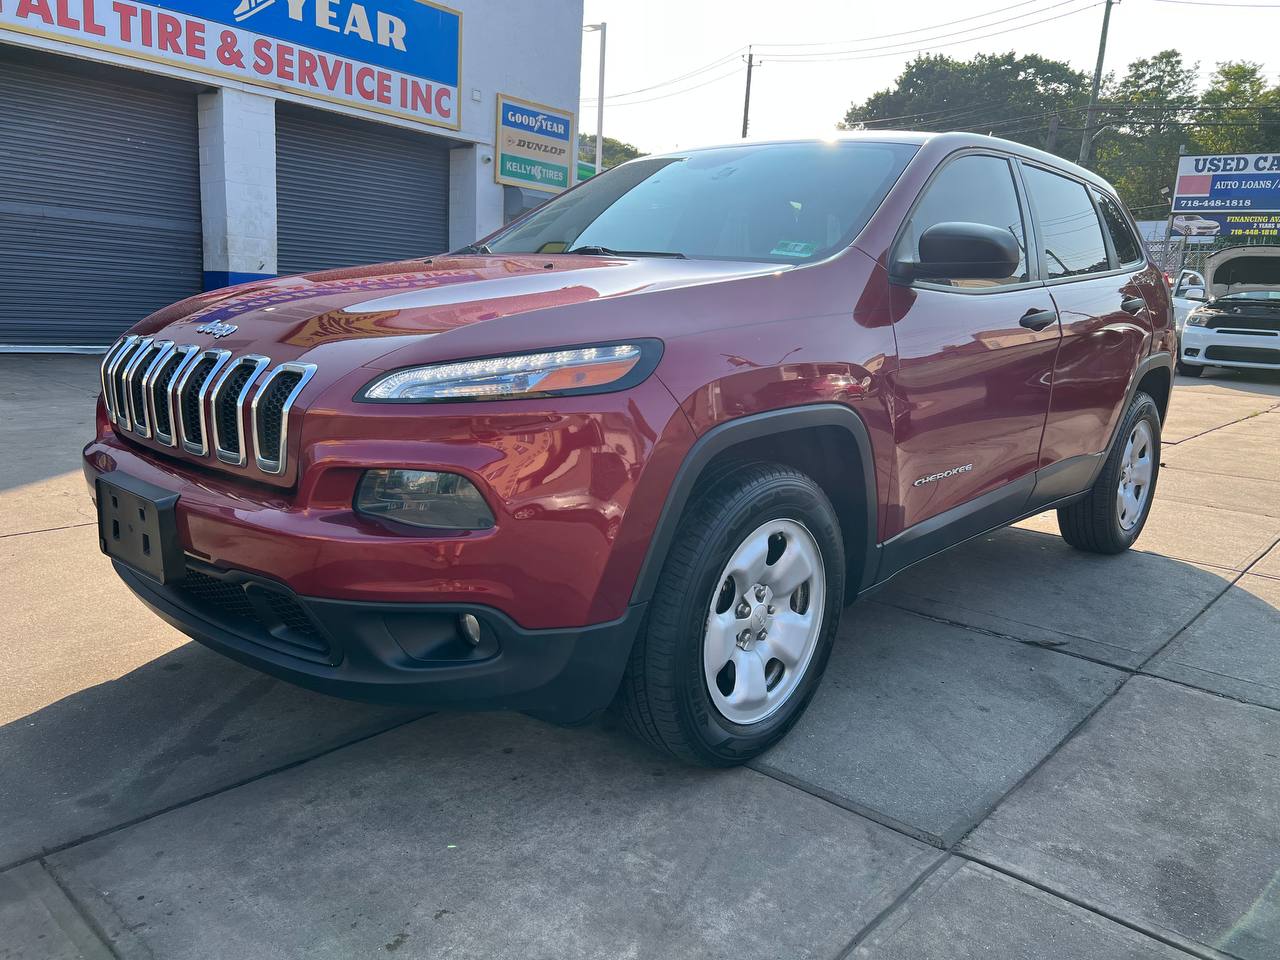 Used Car - 2014 Jeep Cherokee Sport for Sale in Staten Island, NY